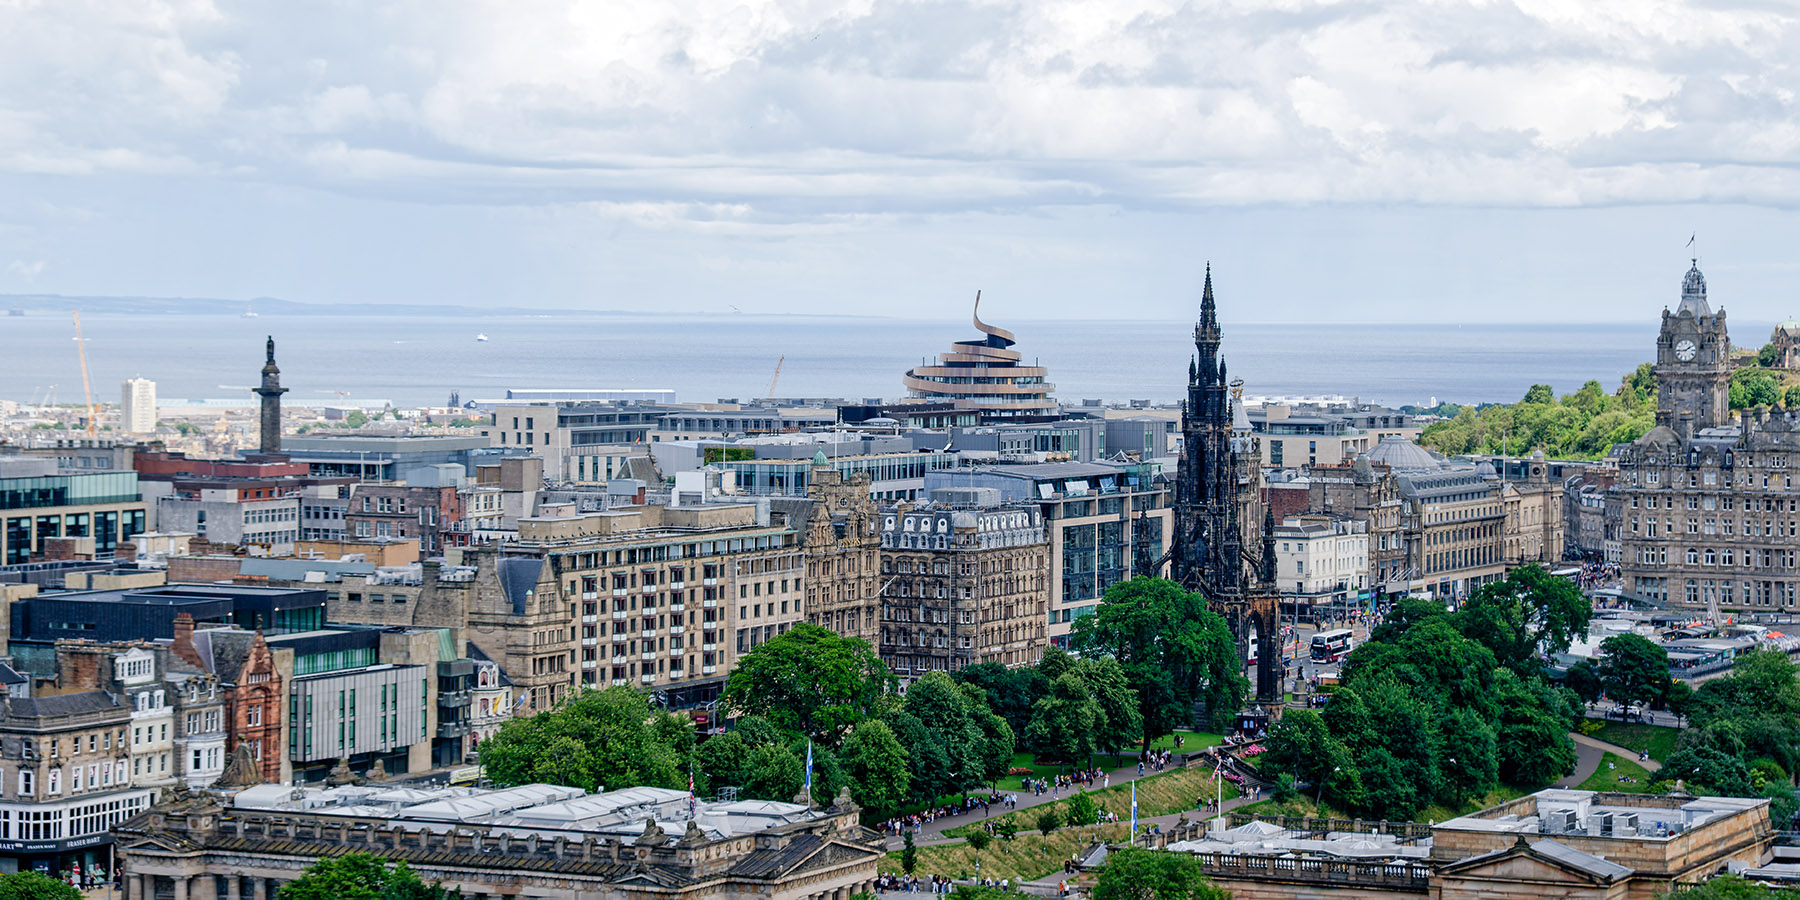 Looking from the castle toward the Scott Monument